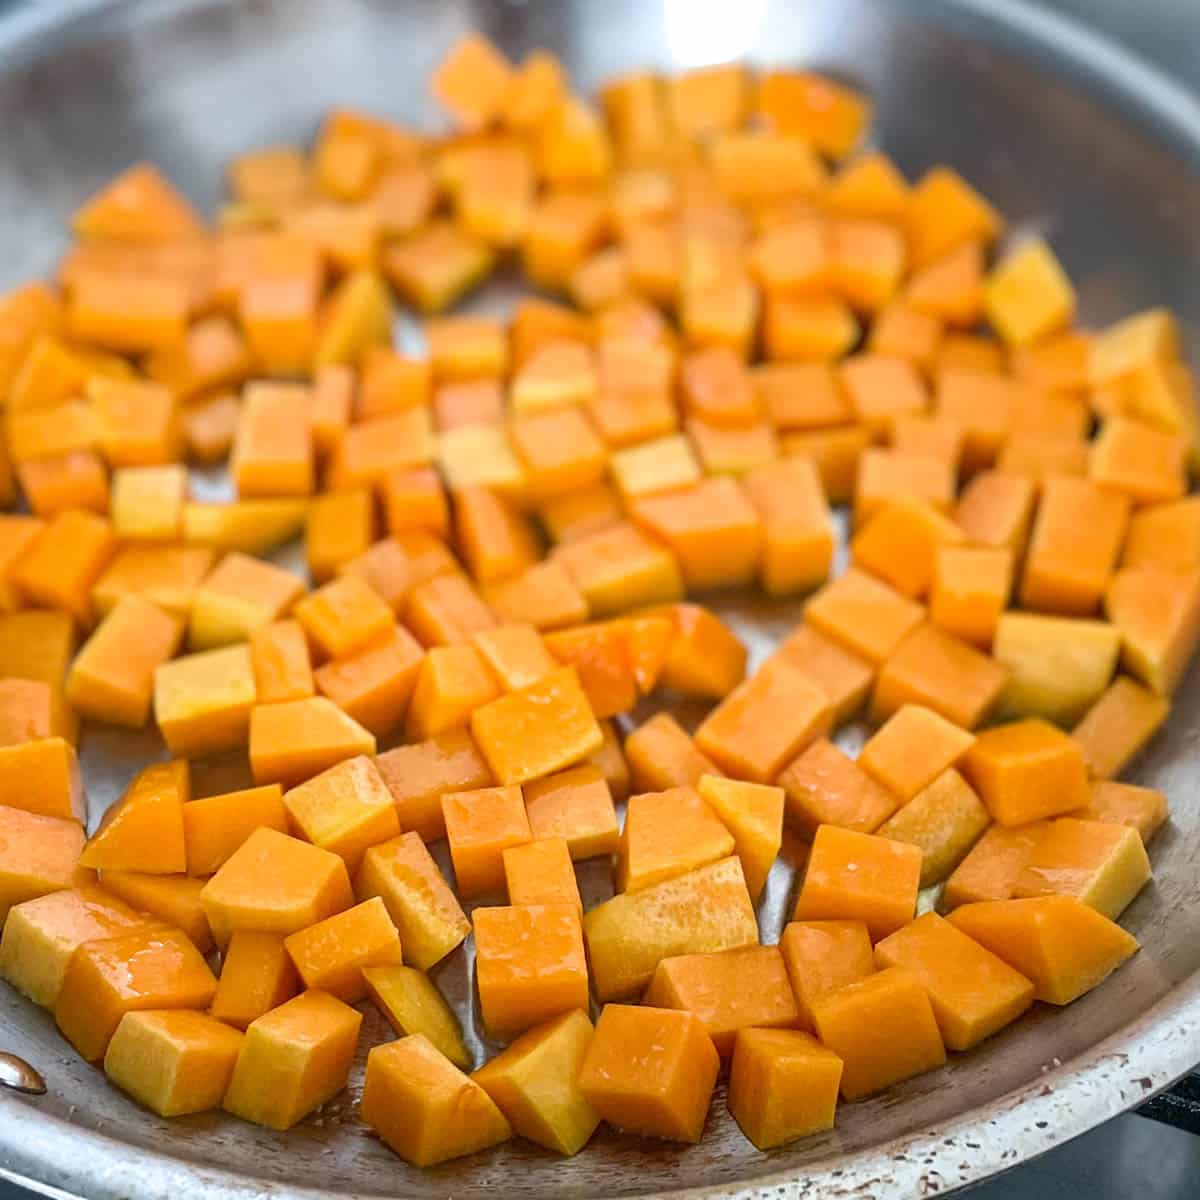 Cubed butternut squash is shown in a pan with olive oil.